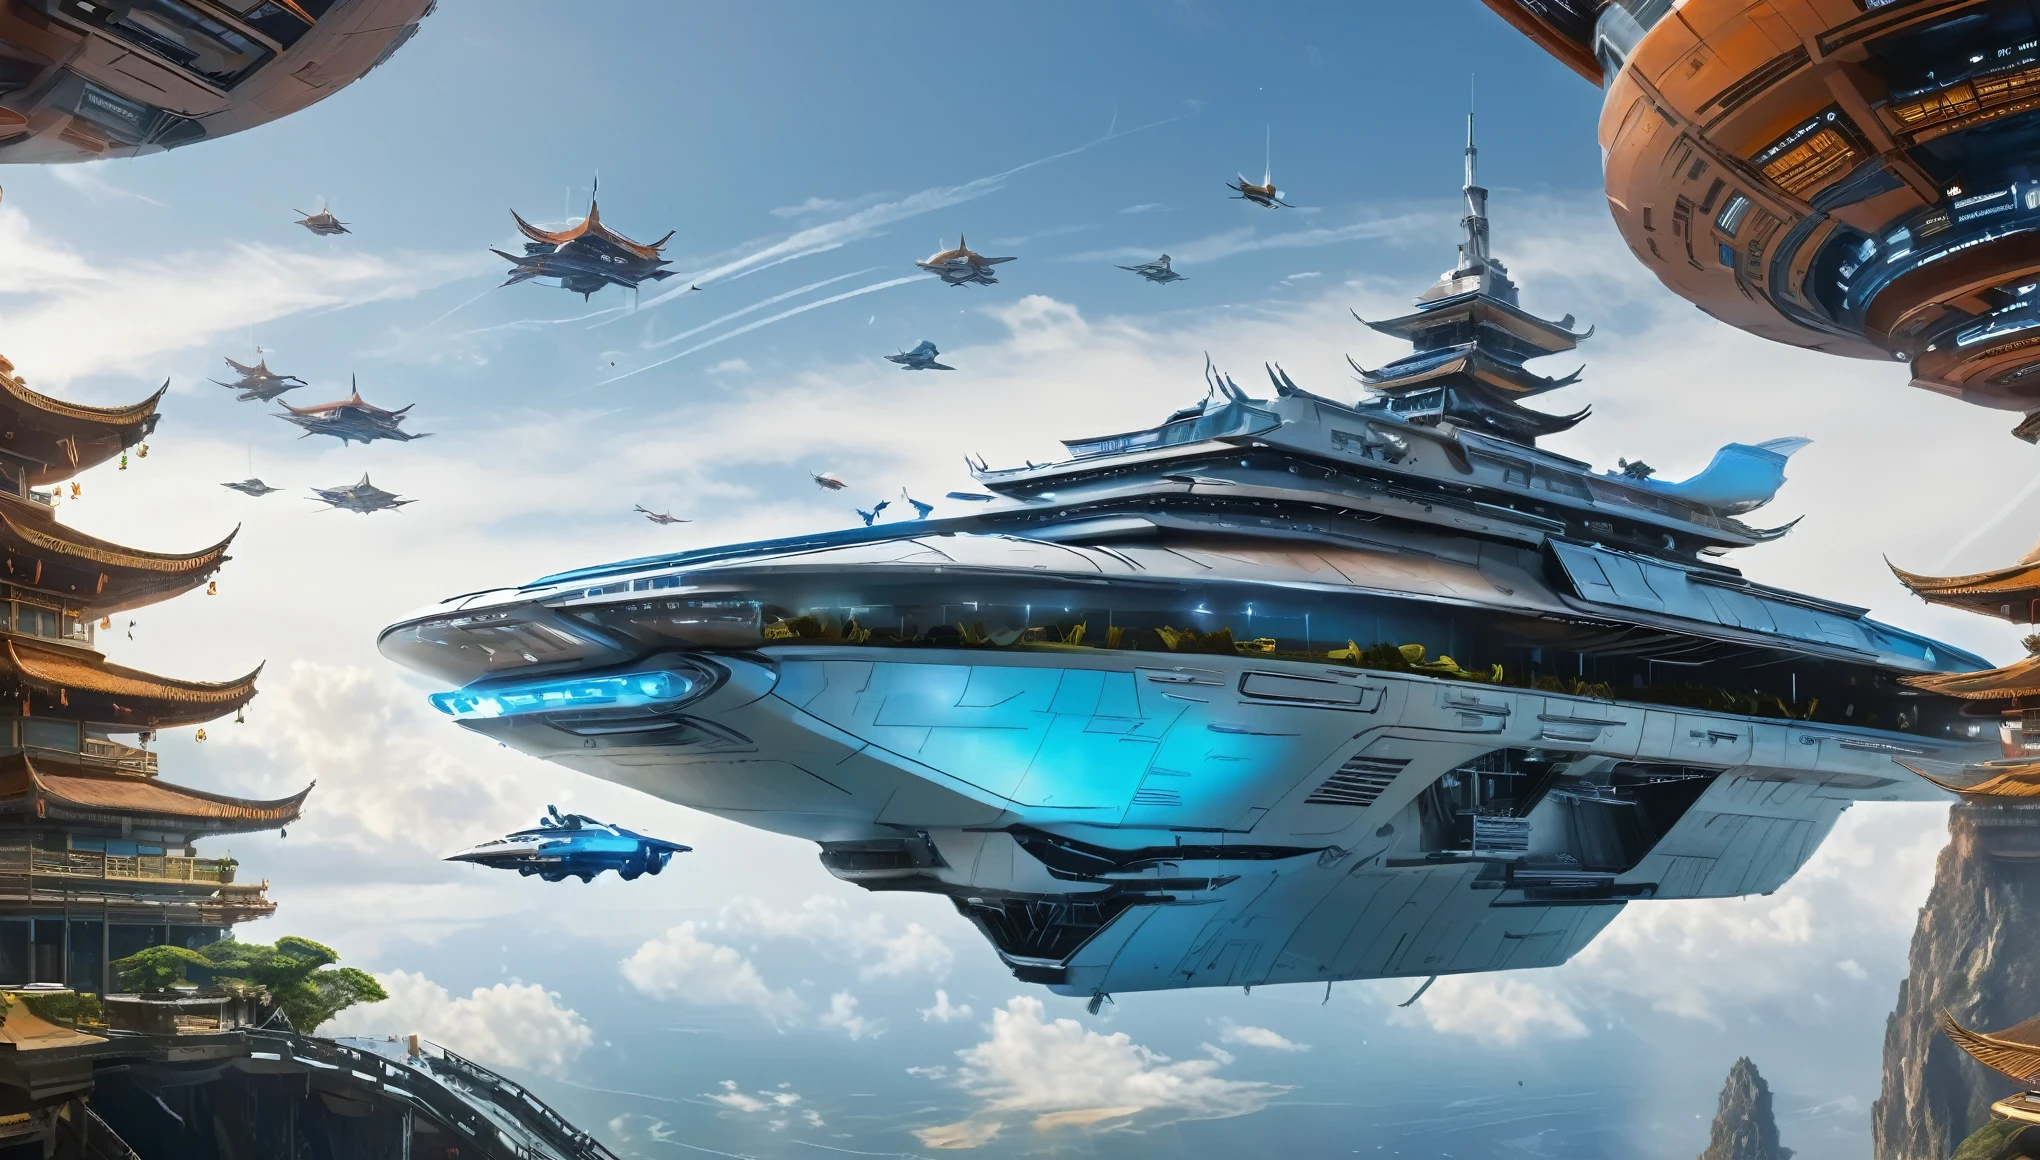 (large space carrier),(futuristic),(powered by advanced science and technology),(Stylish and majestic design),(floating quietly in space),(Use a huge engine to push it forward),(Level 6，with docking station),(Huge glass windows reveal the universe),(Surrounded by a protective force field),(Glows soft blue light),(There are complex laser cannons on the side),(Painted with Chinese symbol of strength and unity),(Accommodate a diverse crew from different cultures),(including engineers, Homes, and astronauts),(wearing futuristic uniforms),(Perform duties with precision and professionalism),(Busy command center with holographic displays and control panels),(Captain&#39;s cabin offers stunning starry views),(Spacious botanical garden，Planted with exotic plants from Earth and elsewhere),(Zero gravity simulation and martial arts training facility),(Medical room equipped with advanced treatment technology),(Relaxation area for crew to relax and socialize),(Virtual reality rooms bring immersive entertainment),(magnificent observation deck，Panoramic view),(Celestial bodies pass by in mesmerizing colors),(Create a sense of awe and wonder),(Capturing the essence of exploration and human creativity),(With eternal beauty that transcends national boundaries and cultures),(combine art, science and technology, and cosmic). (best quality, Super detailed),(actual),(high dynamic range),(bright colors),(sharp focus),(Physically based rendering:1.2),(masterpiece:1.1),(ultra high definition),(professional lighting),(Bokeh).